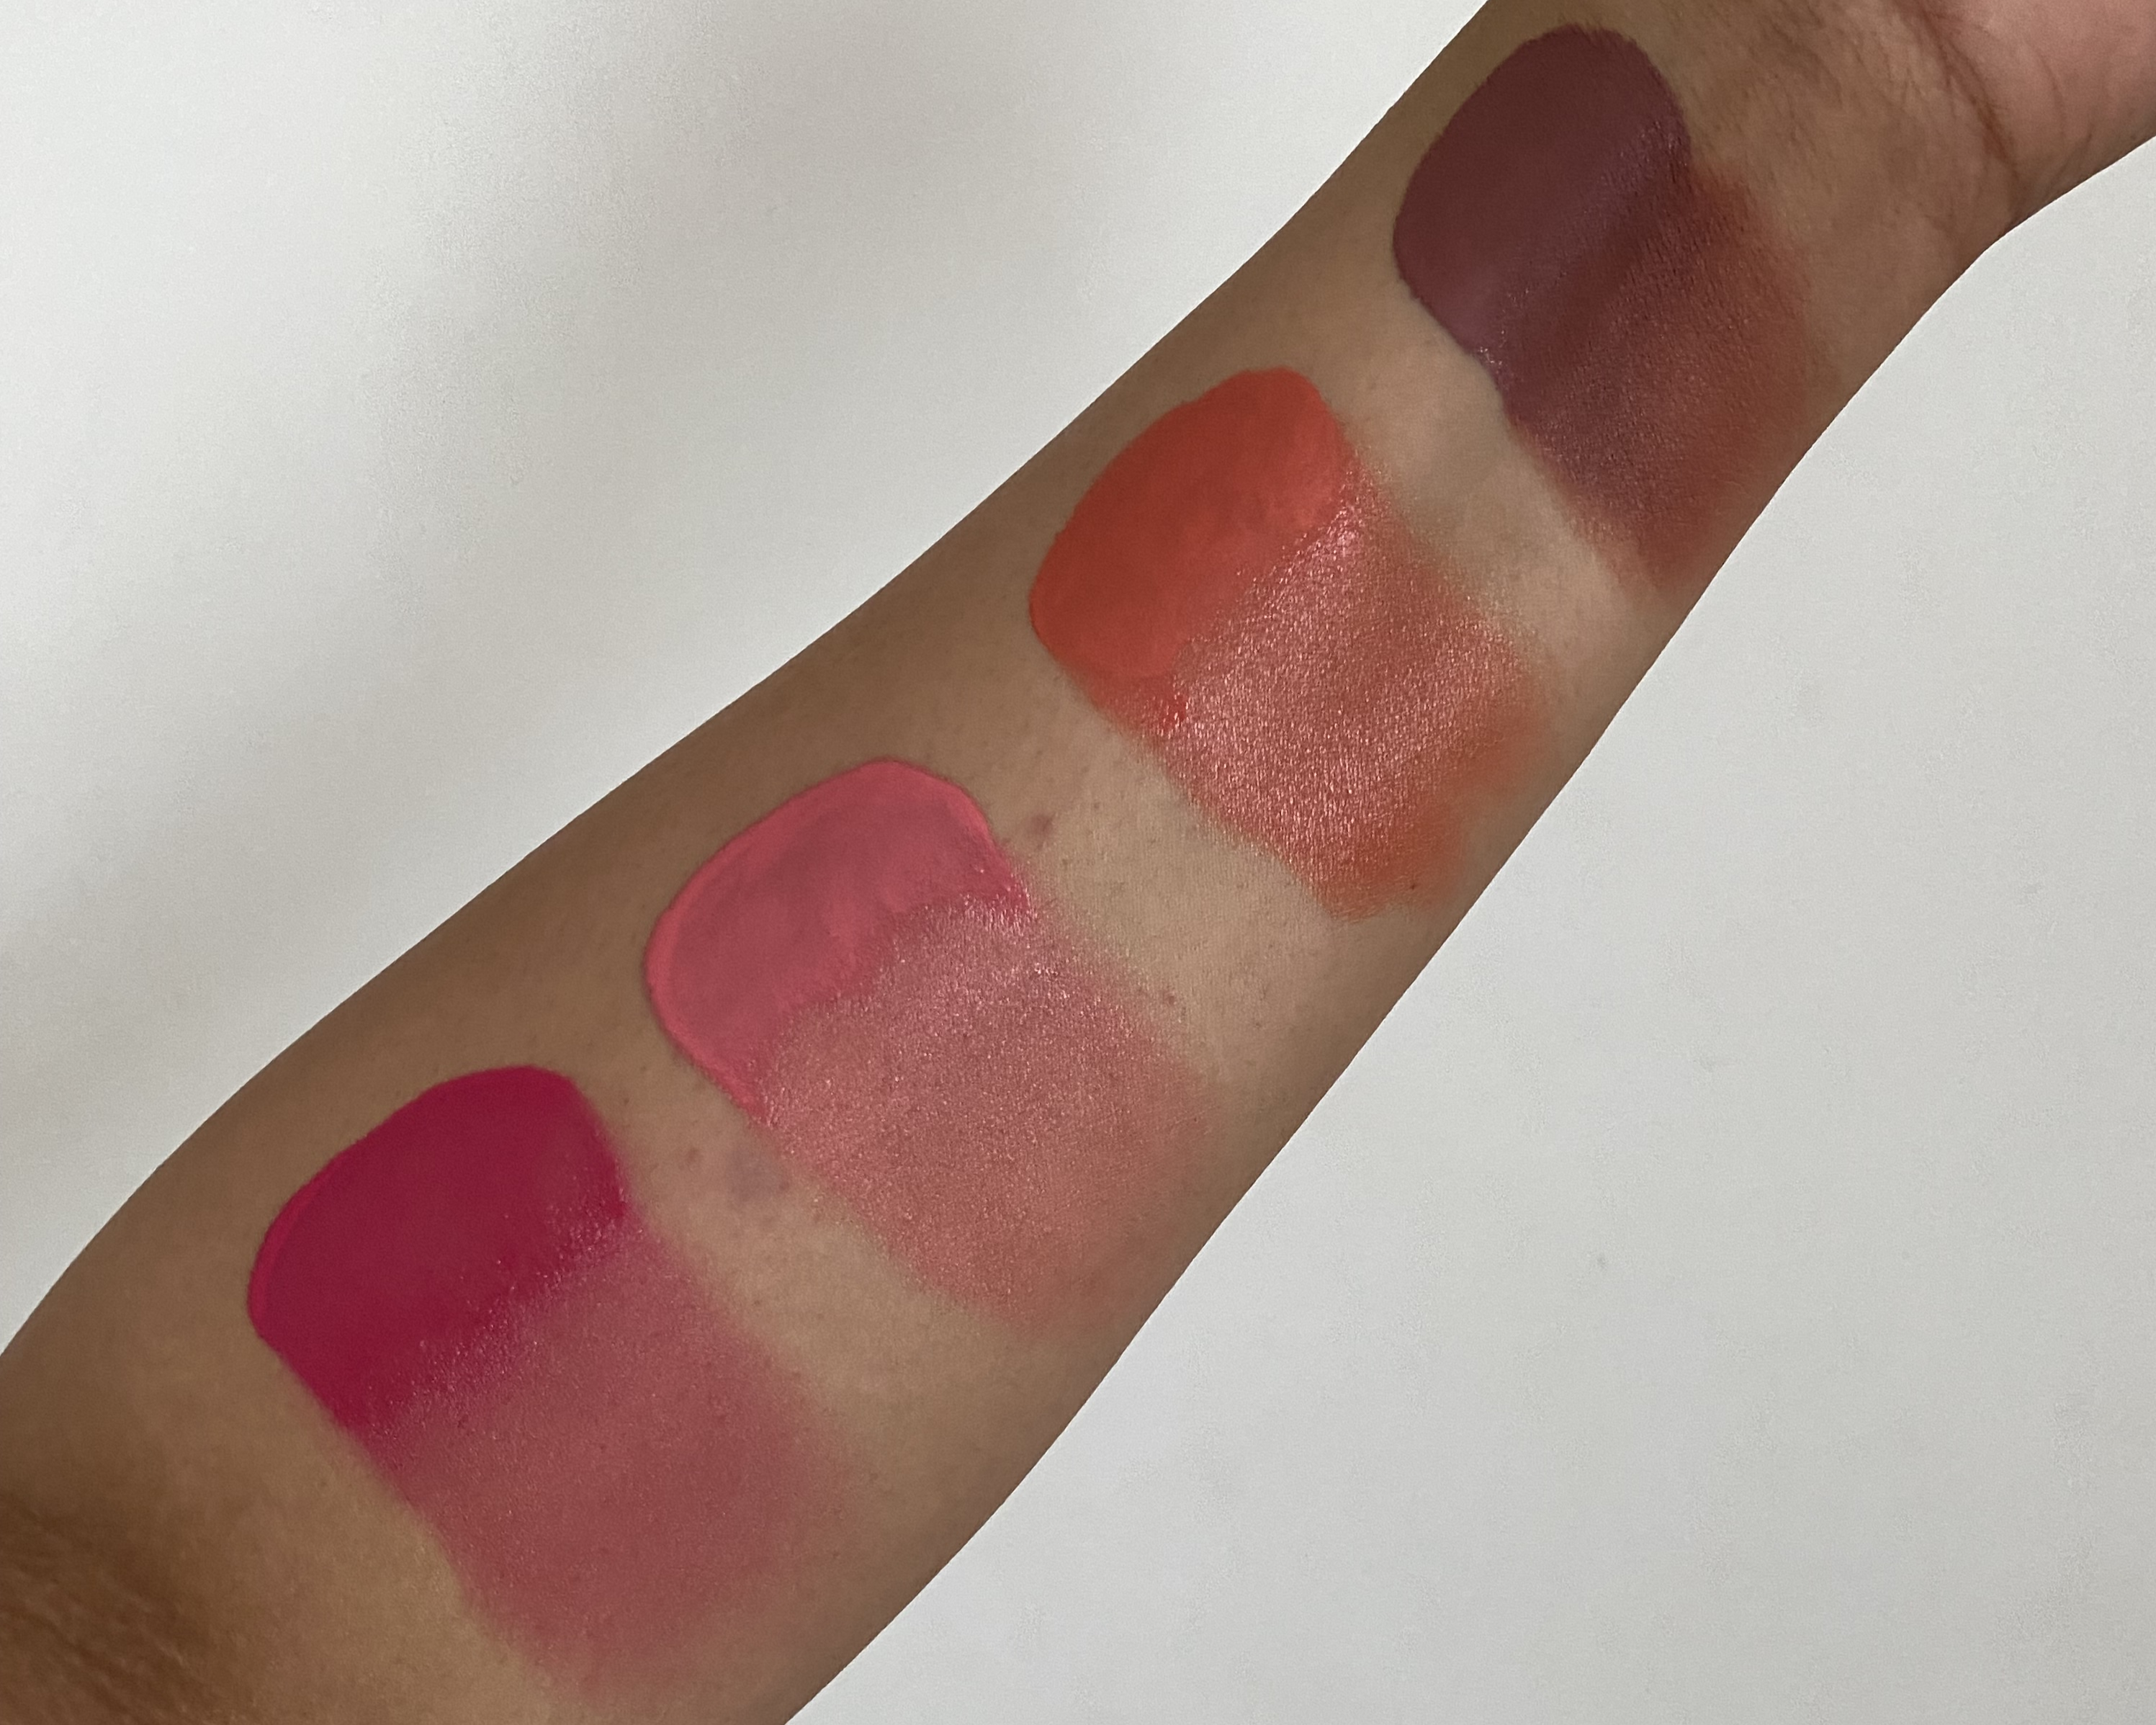 Rare Beauty Liquid Blush swatches - Dewy Shades | Space NK